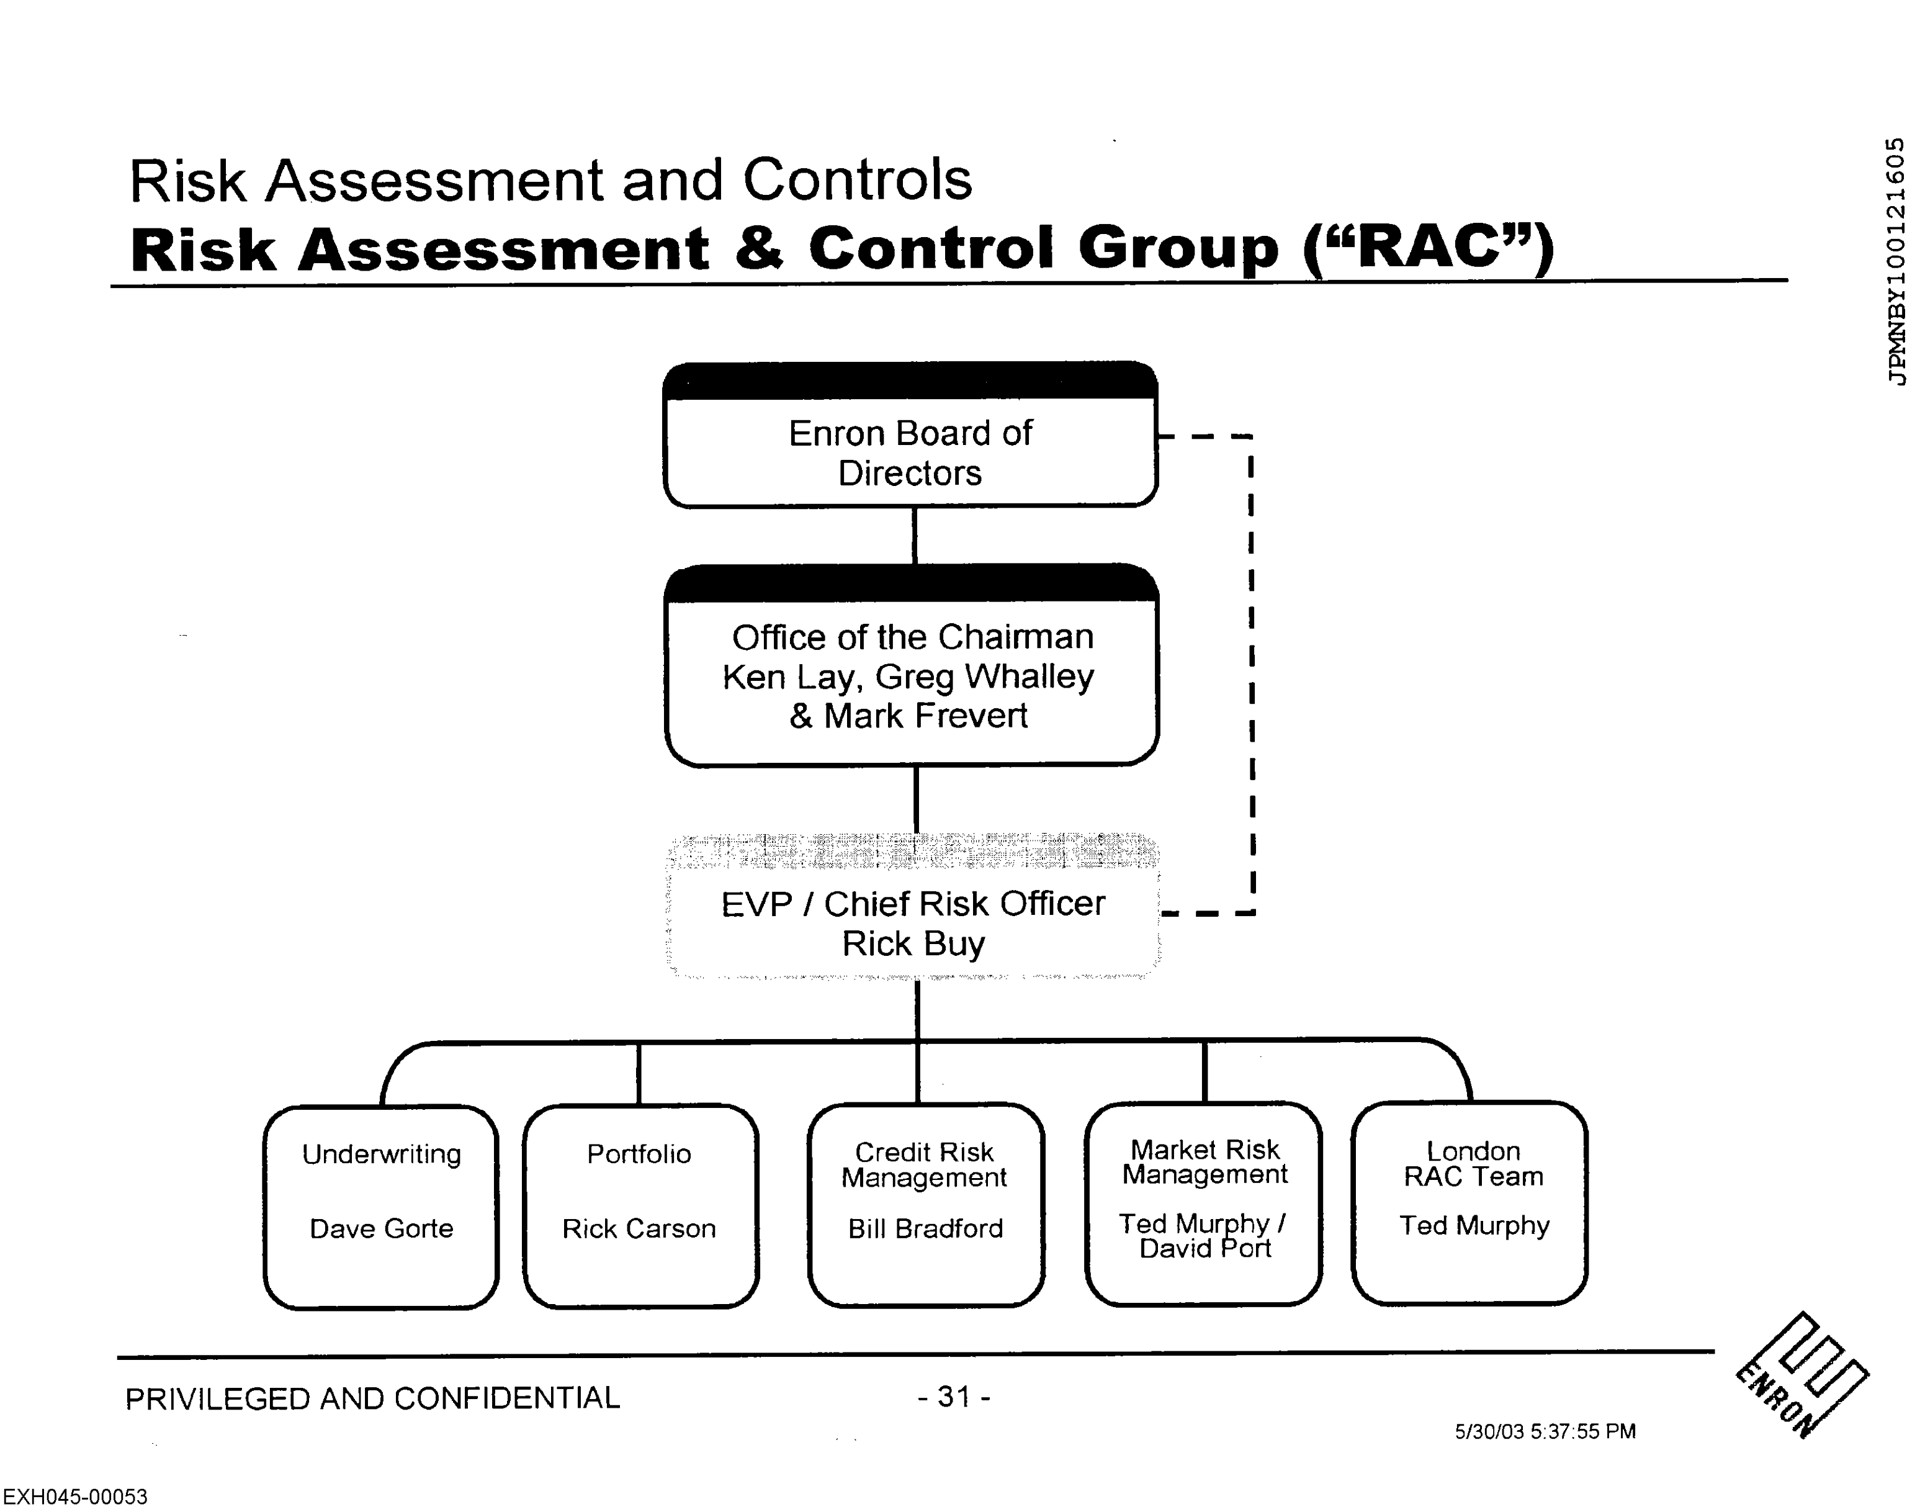 risk assessment and controls risk assessment control group chief risk officer | Enron